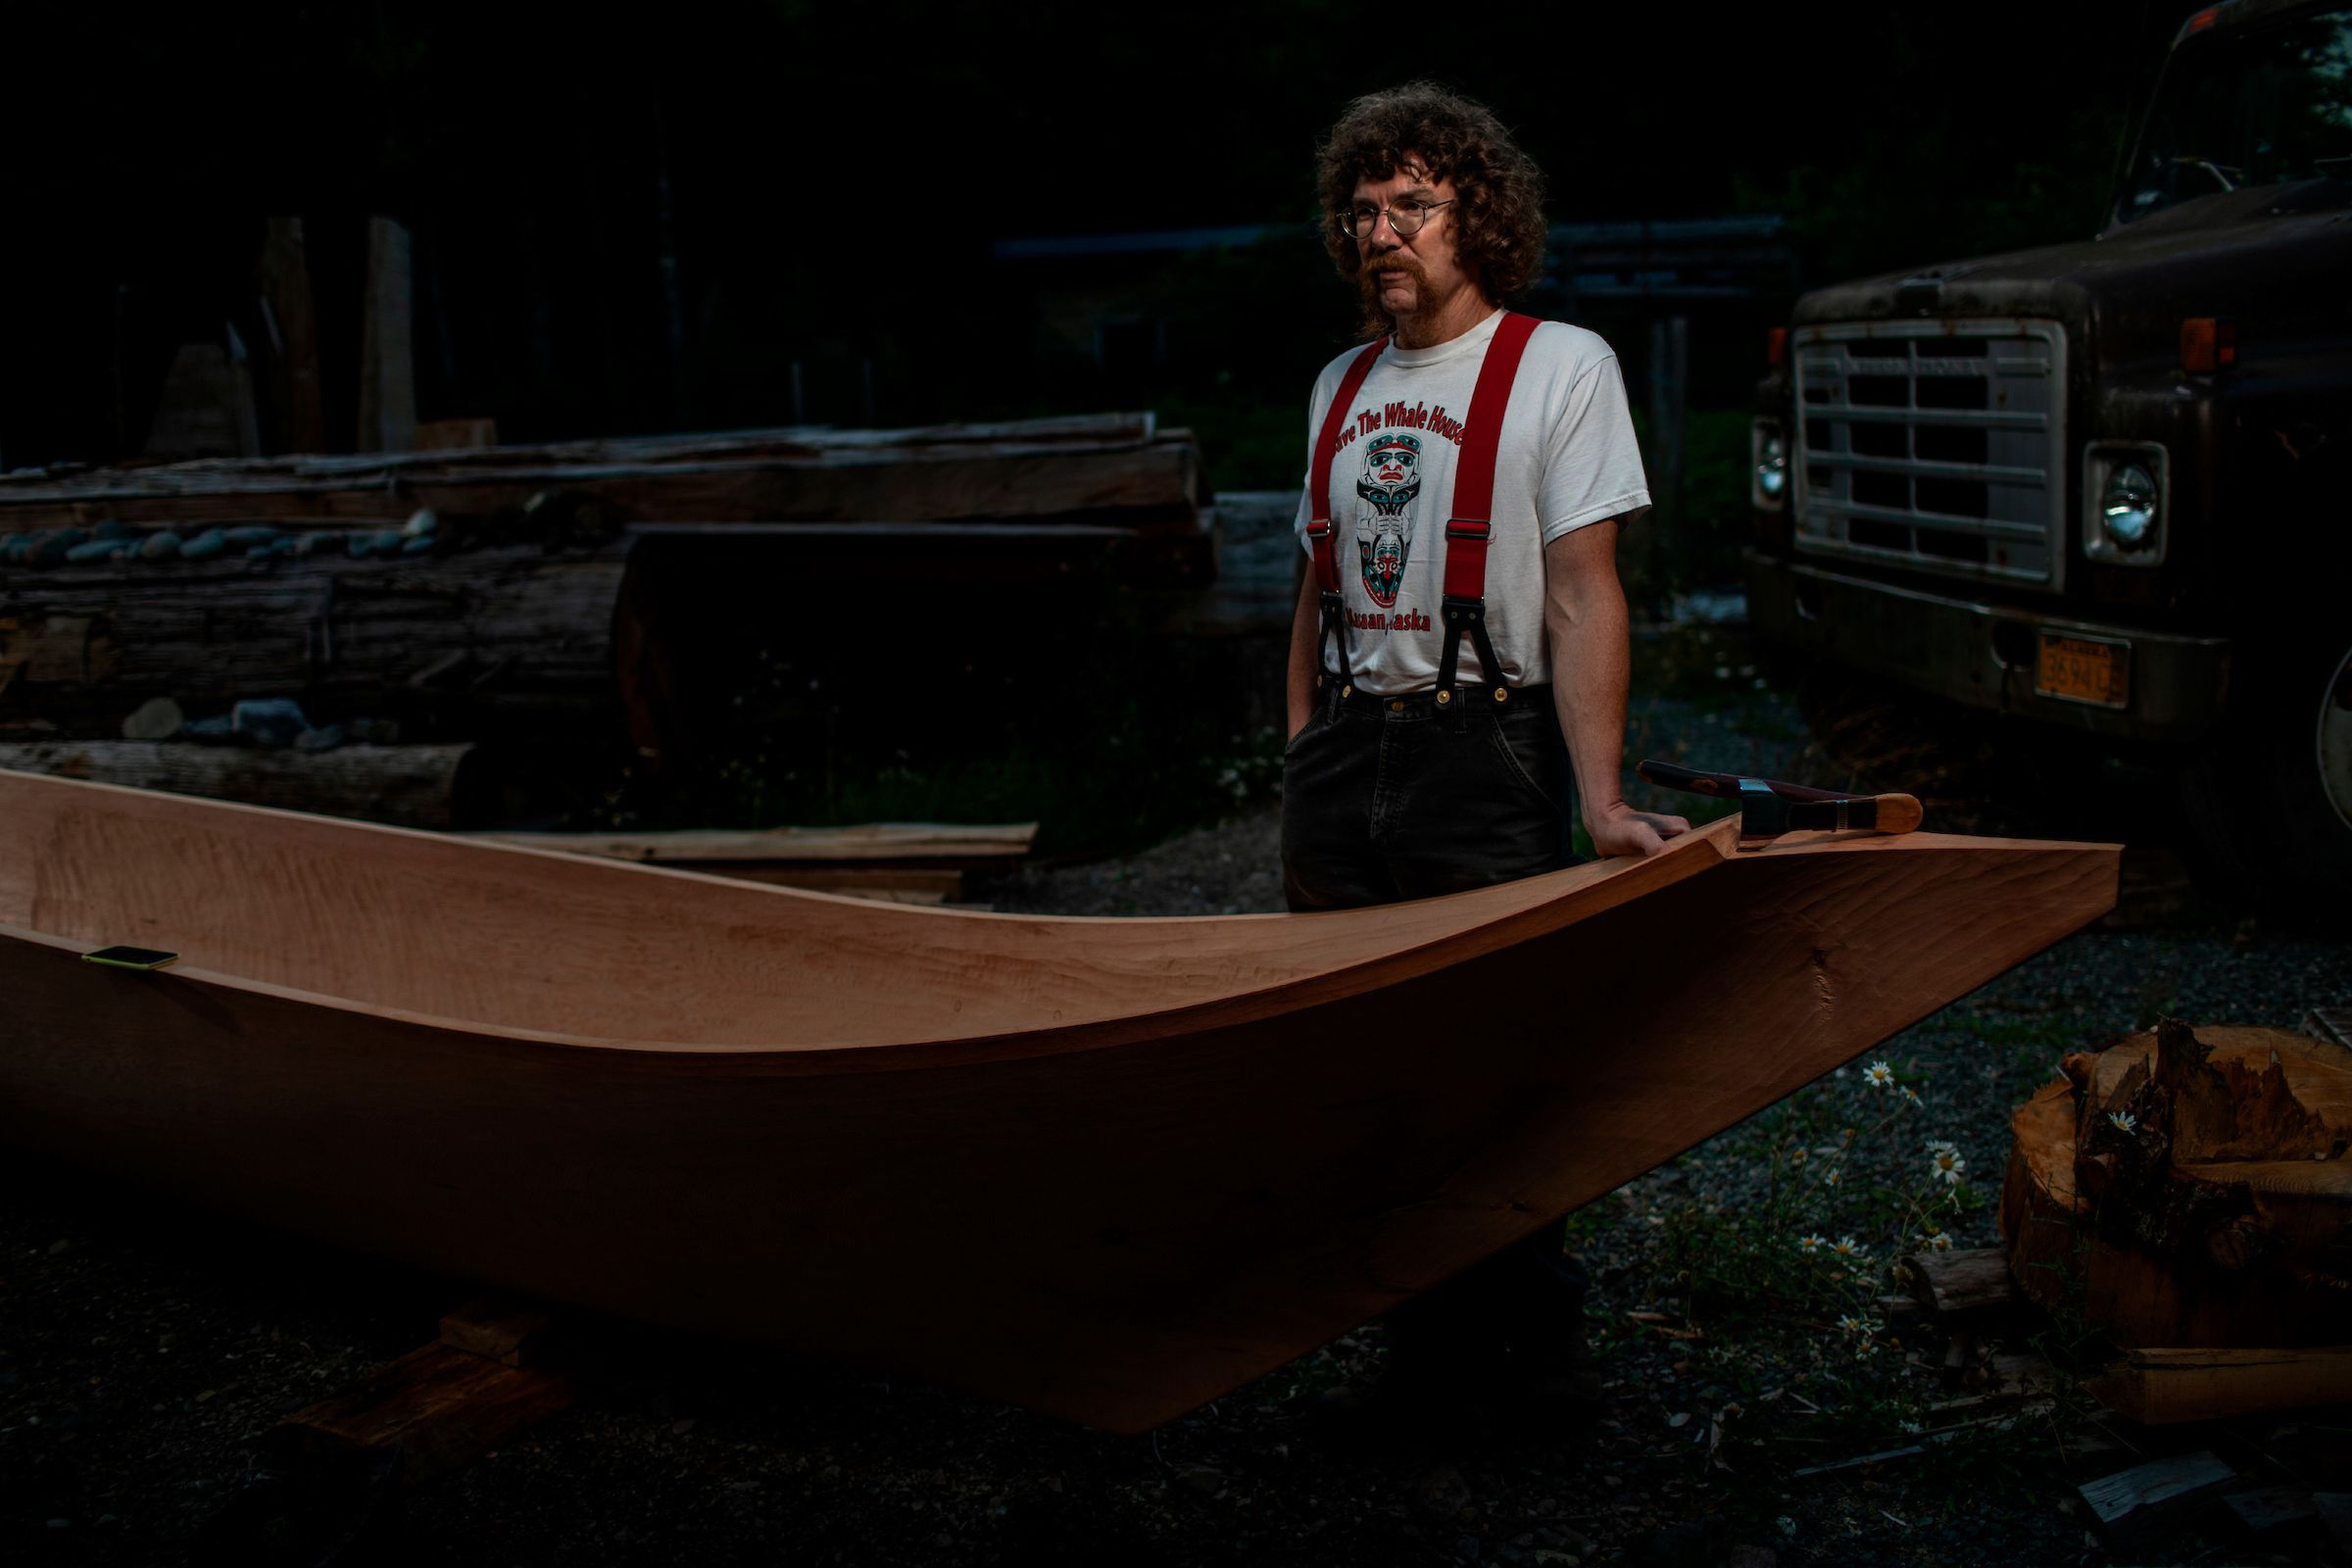 Stormy Hamar, a Haida man, is carving a full-sized canoe using traditional methods. Hamar is one of the few people reviving old techniques. In order to carve a canoe of this scale from a single log, Hamar requires quite large logs, which are becoming difficult to find. Image by Joshua Cogan. United States, 2019.